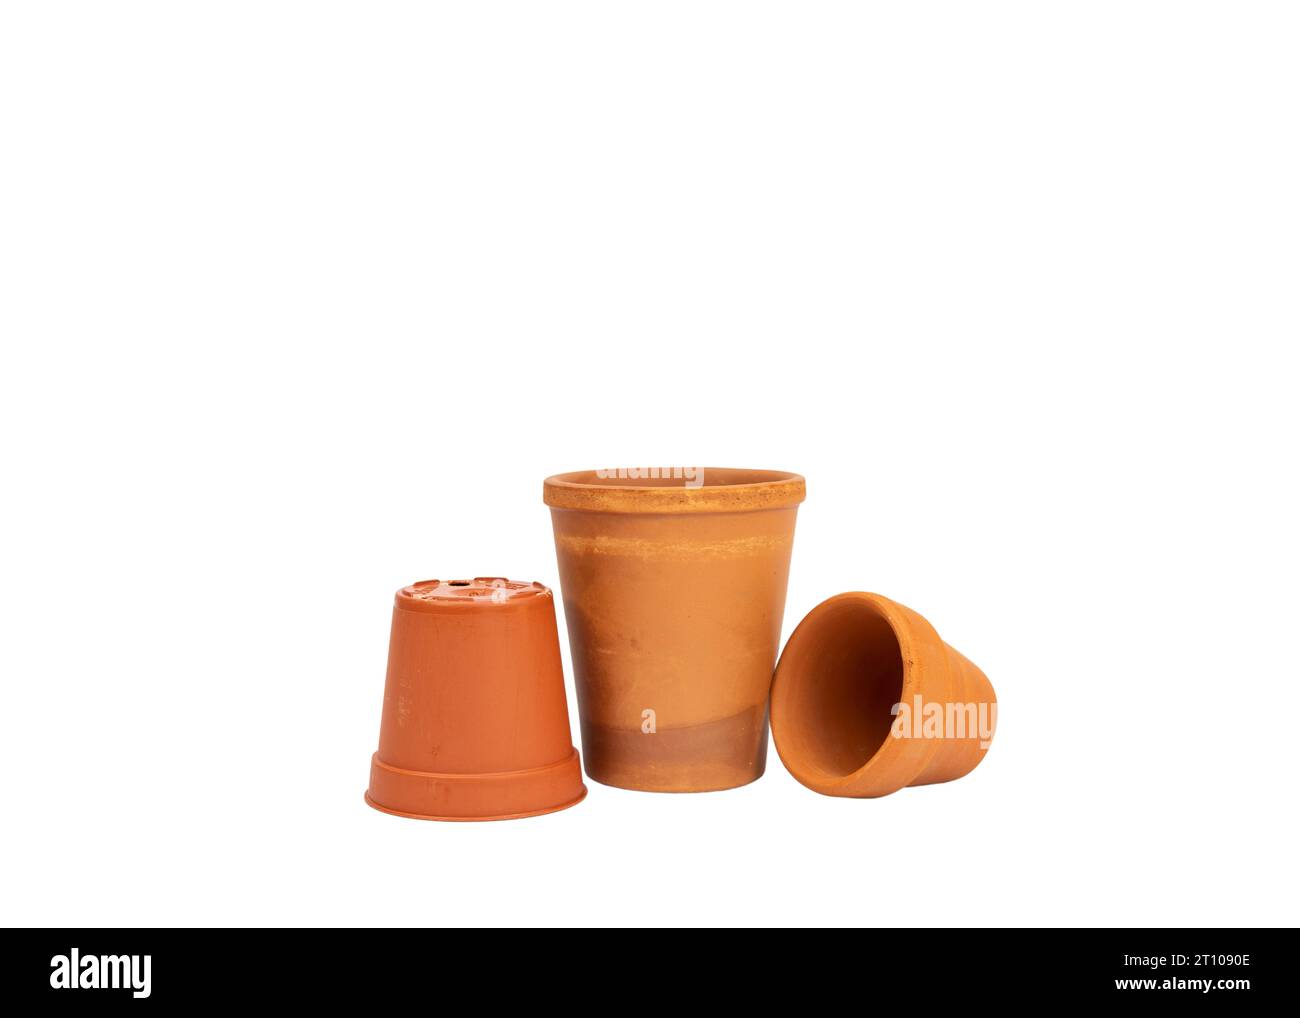 Empty small terracotta plant pot isolated on a white background. Stock Photo